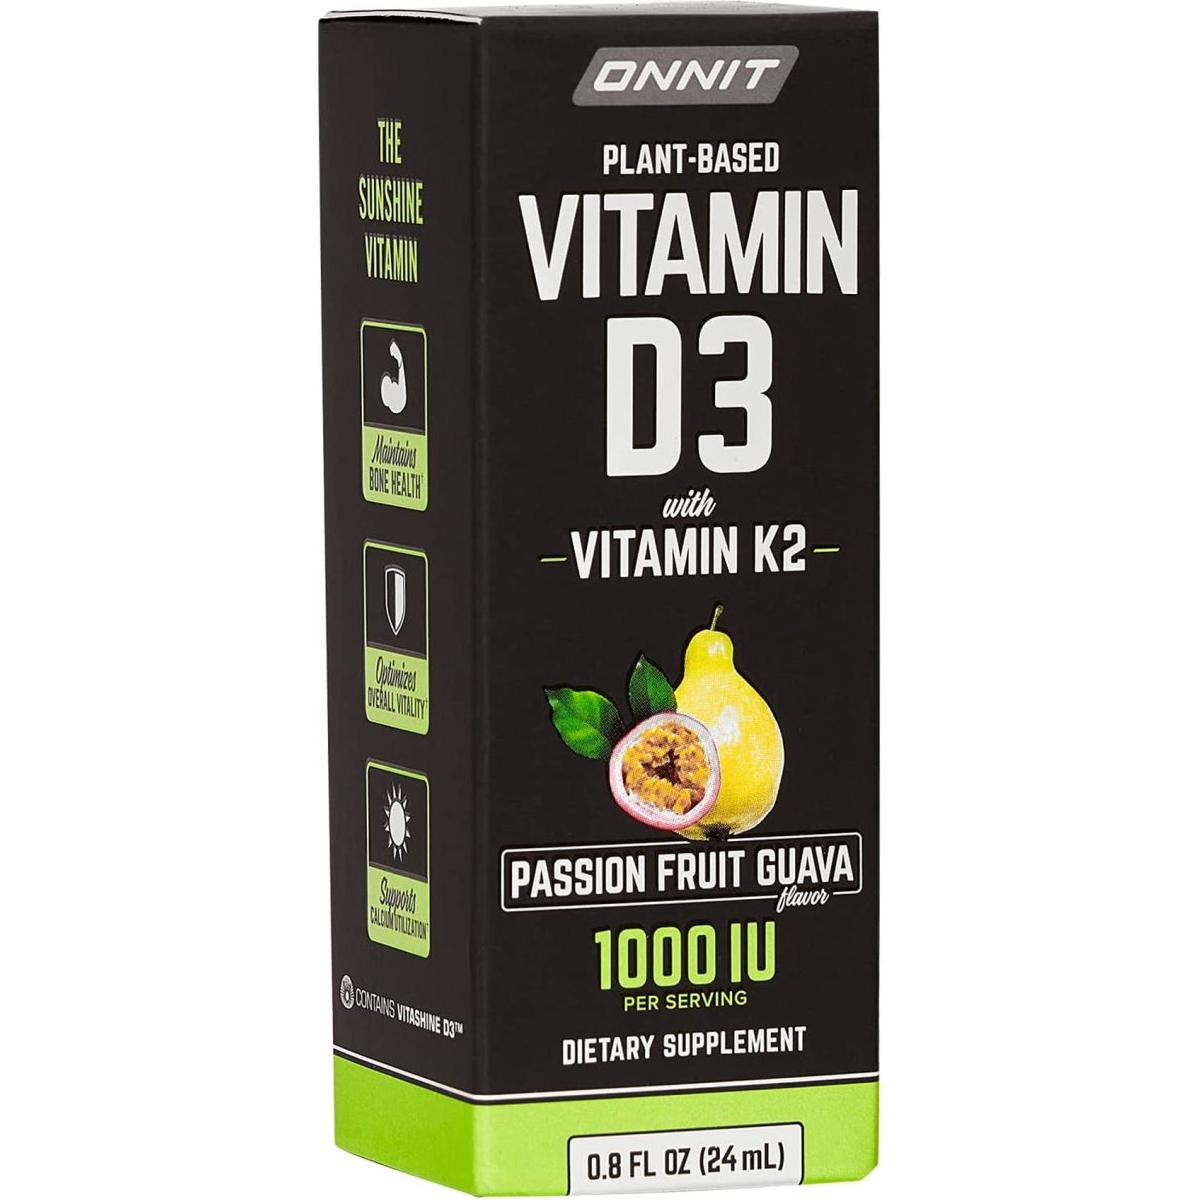 Onnit Labs Passion Fruit Guava Vitamin D3 Spray with Vitamin K2 - 23ml - Glam Global UK